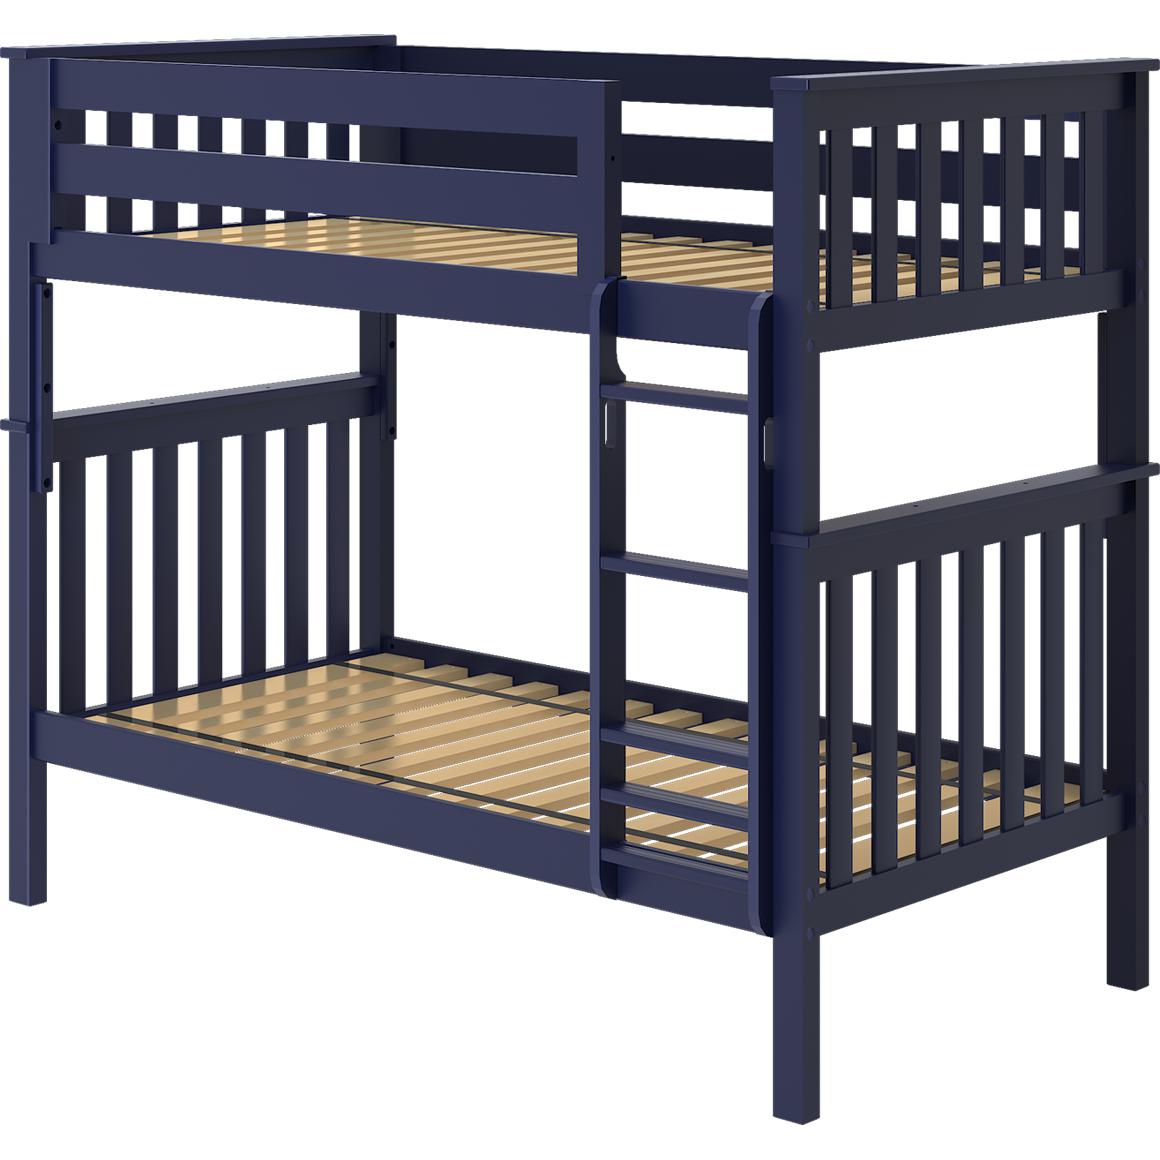 Jackpot Deluxe "BRISTOL" Bunk Bed, Twin over Twin